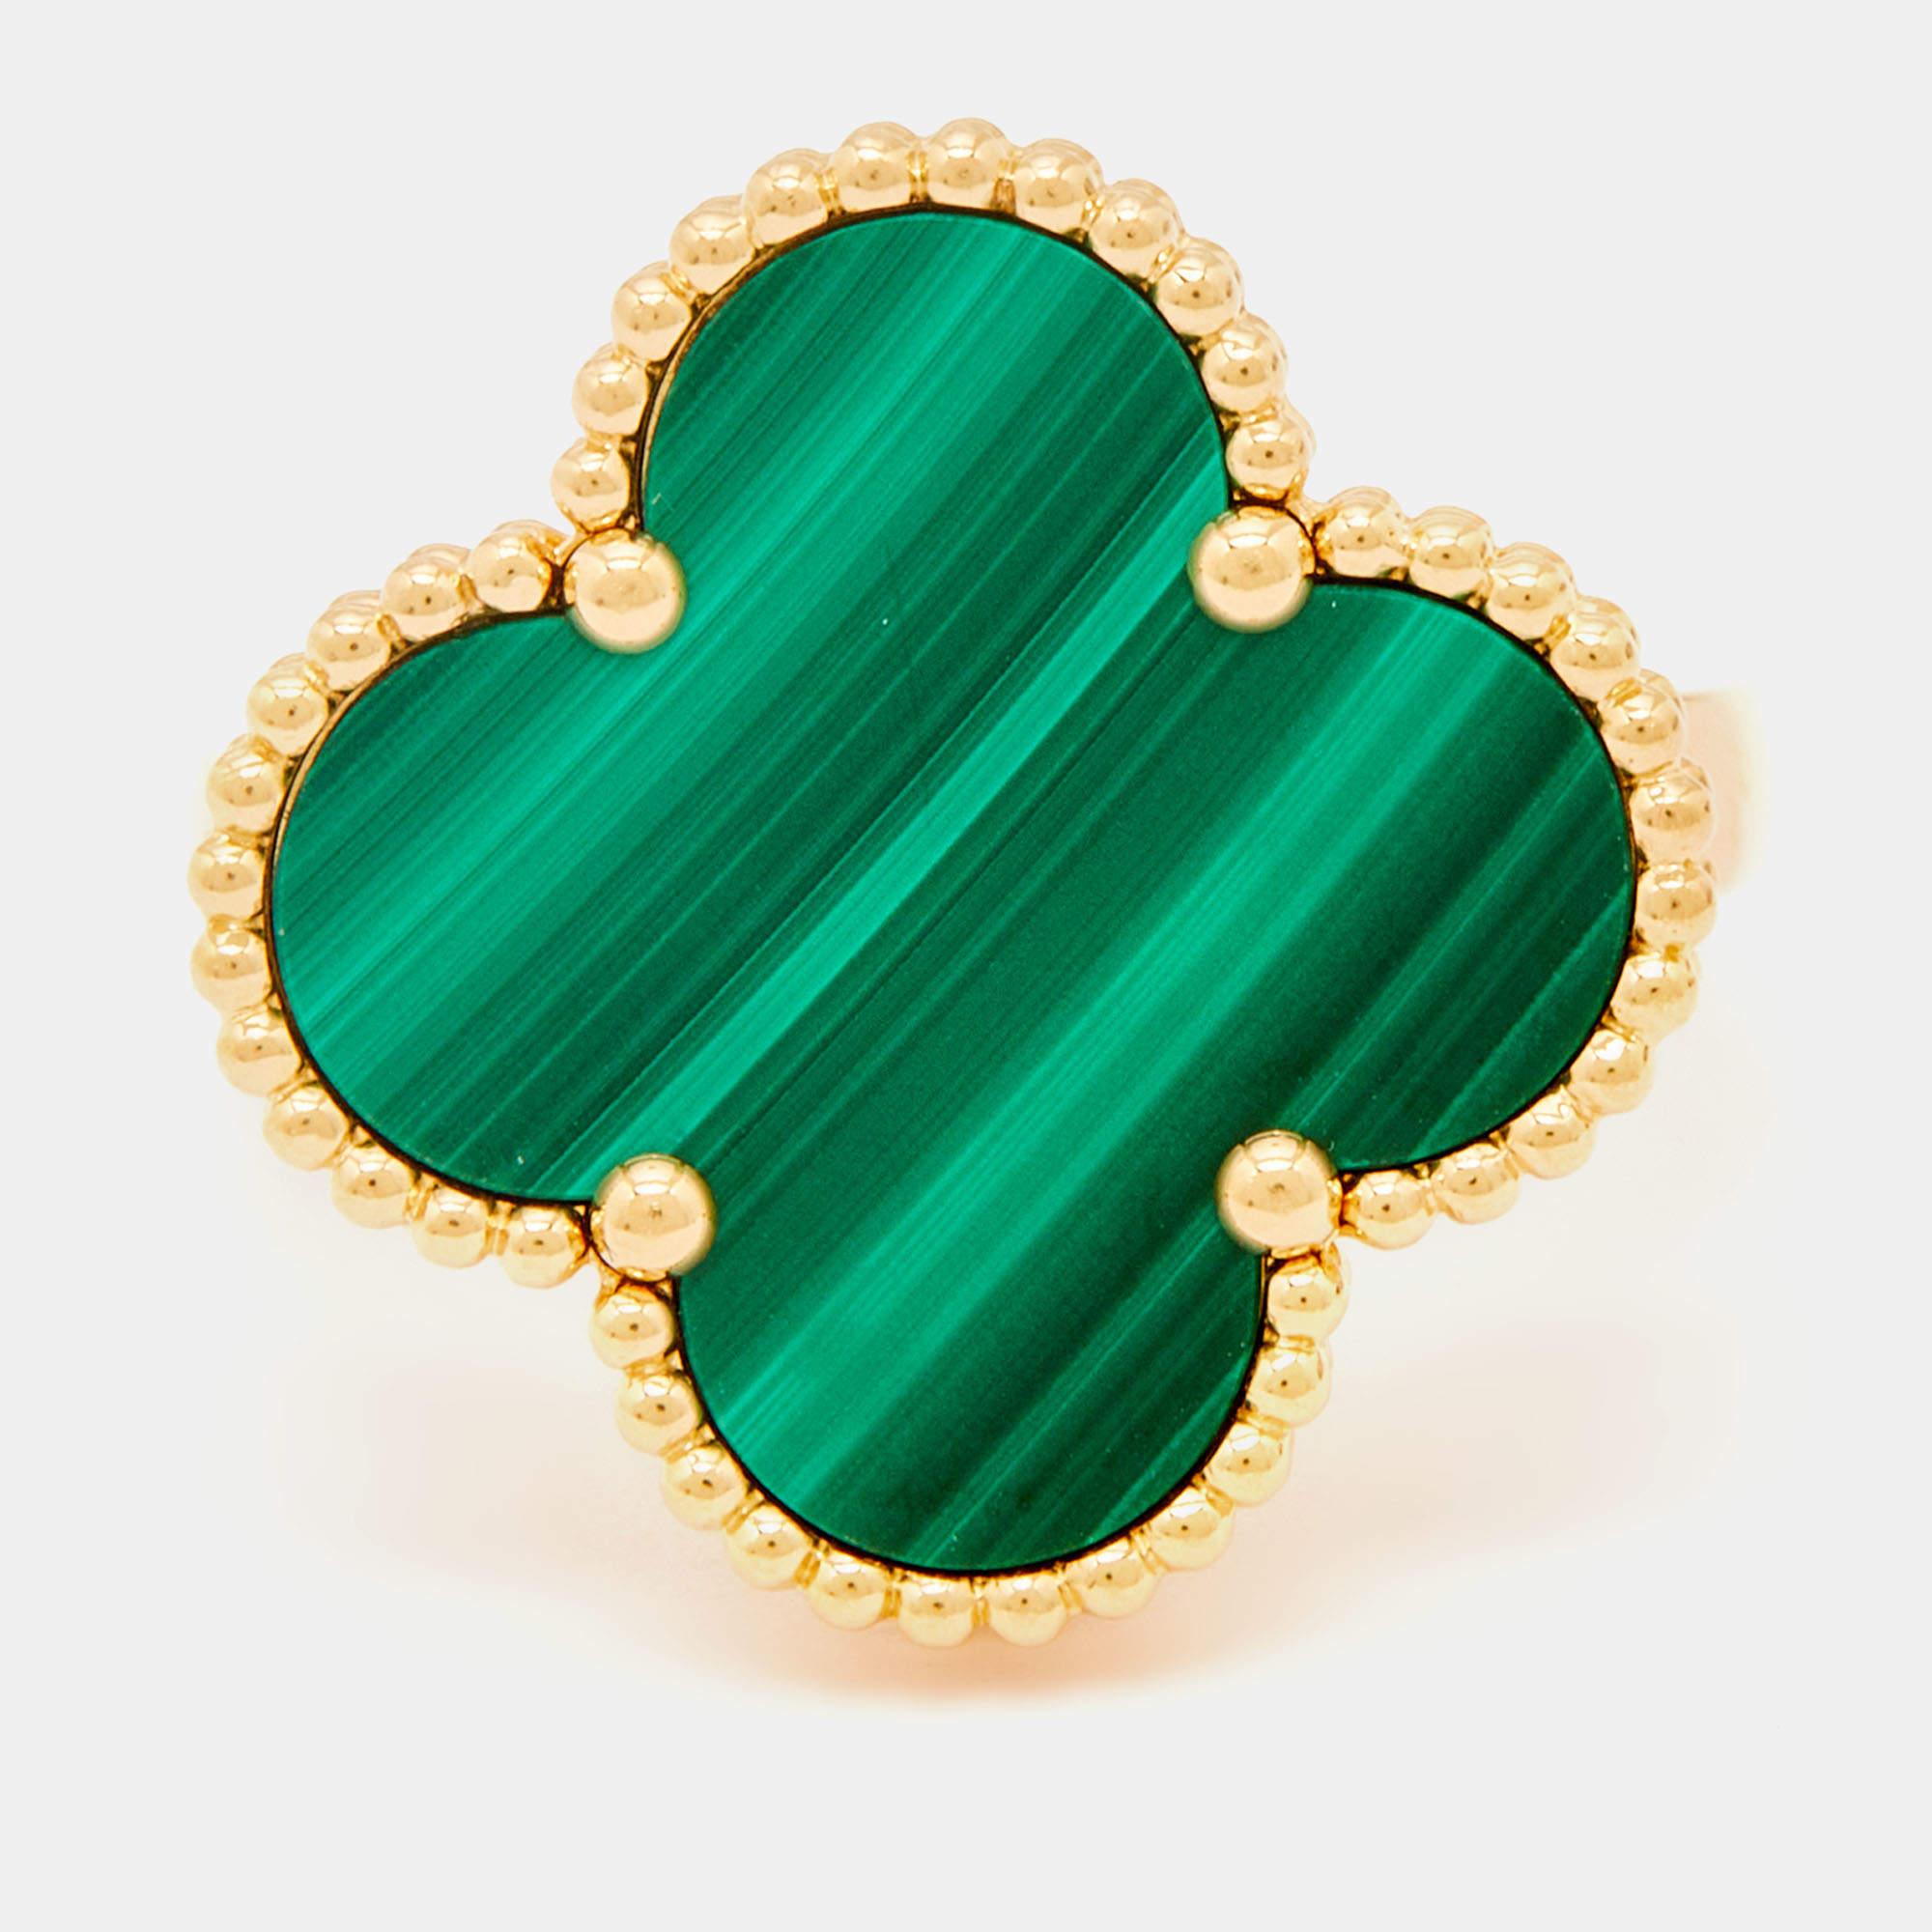 This lovely Van Cleef & Arpels Magic Alhambra ring reflects the mastery and precision that goes into making a VC jewel. Made from 18K yellow gold, the ring has the clover-leaf motif laid with malachite.

